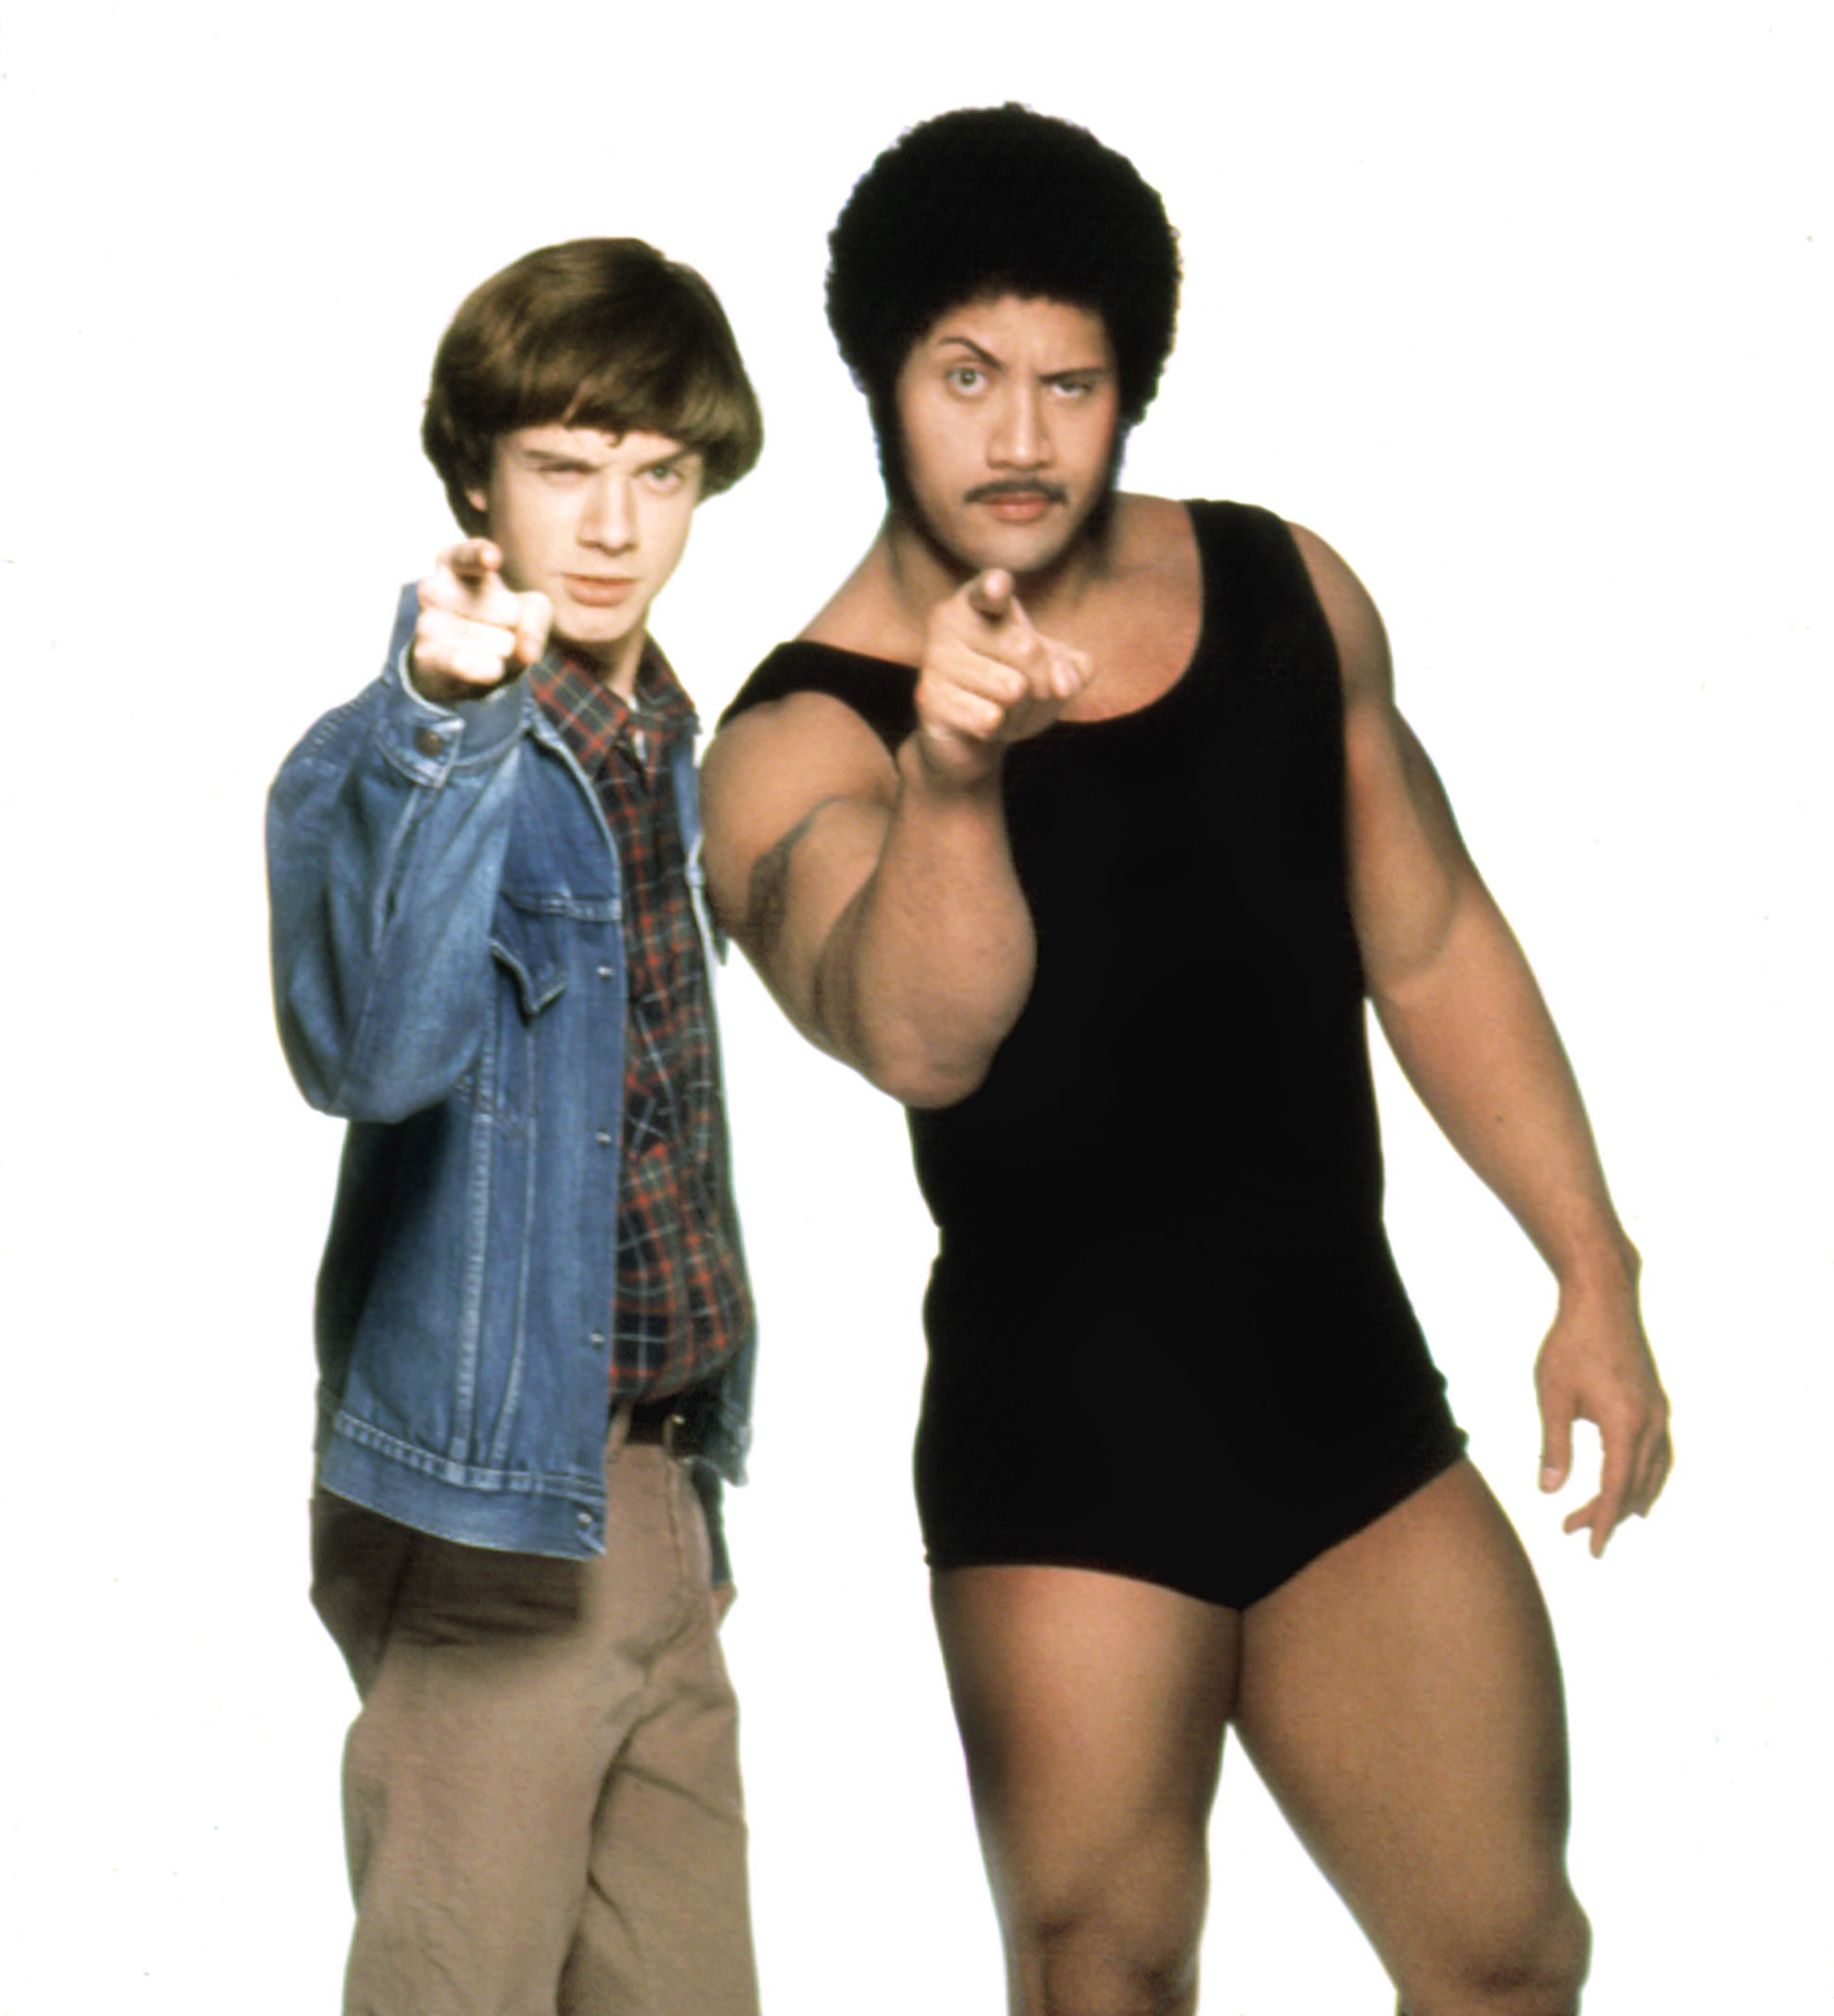 Topher Grace and Johnson in a promotional image for the  That Wrestling Show  episode of That '70s Show in 1999.